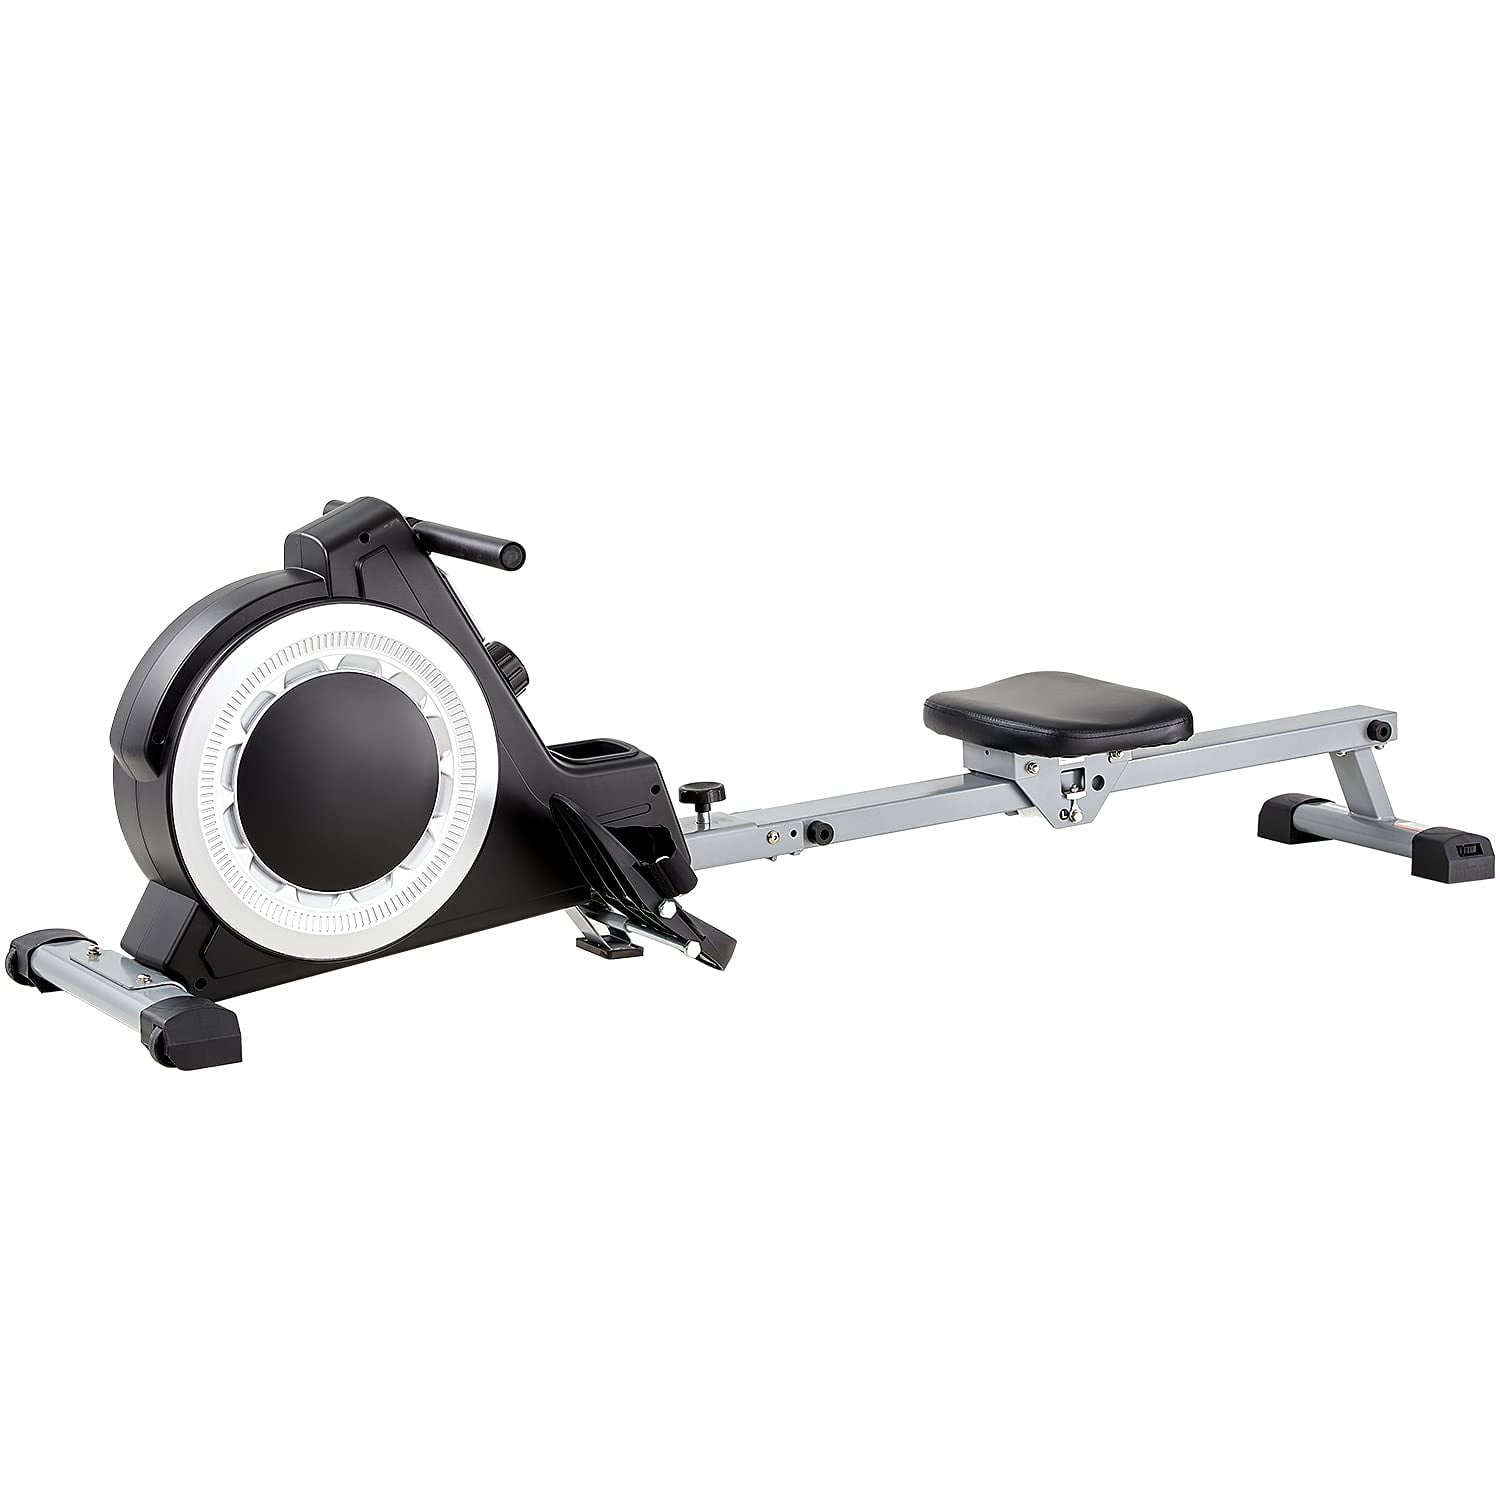 LCD Rowing Machine Foldable Resistance Cardio Fitness Gym Workout Toning Rower 